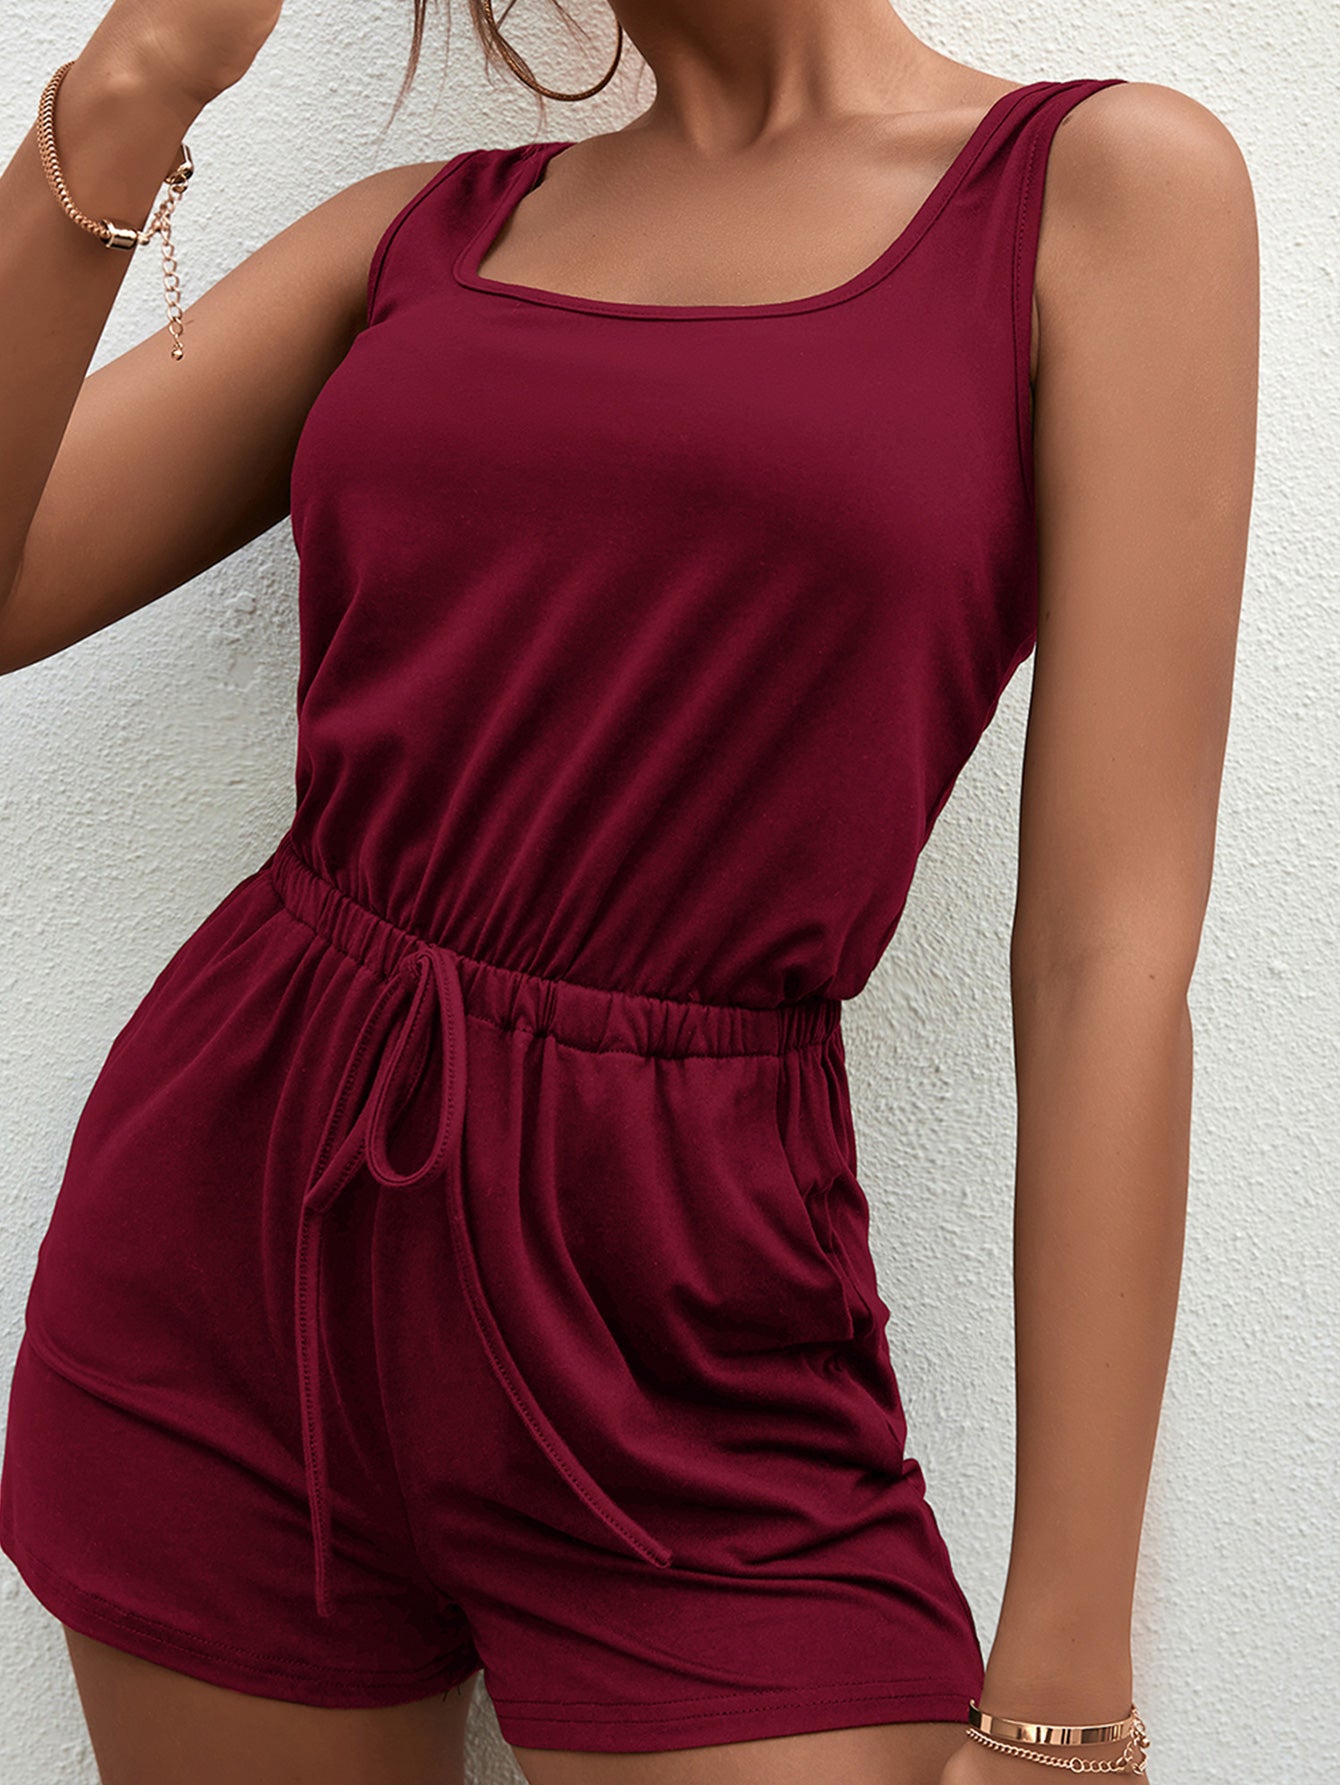 Square Neck Sleeveless Romper with Pockets - Nicole Lee Apparel